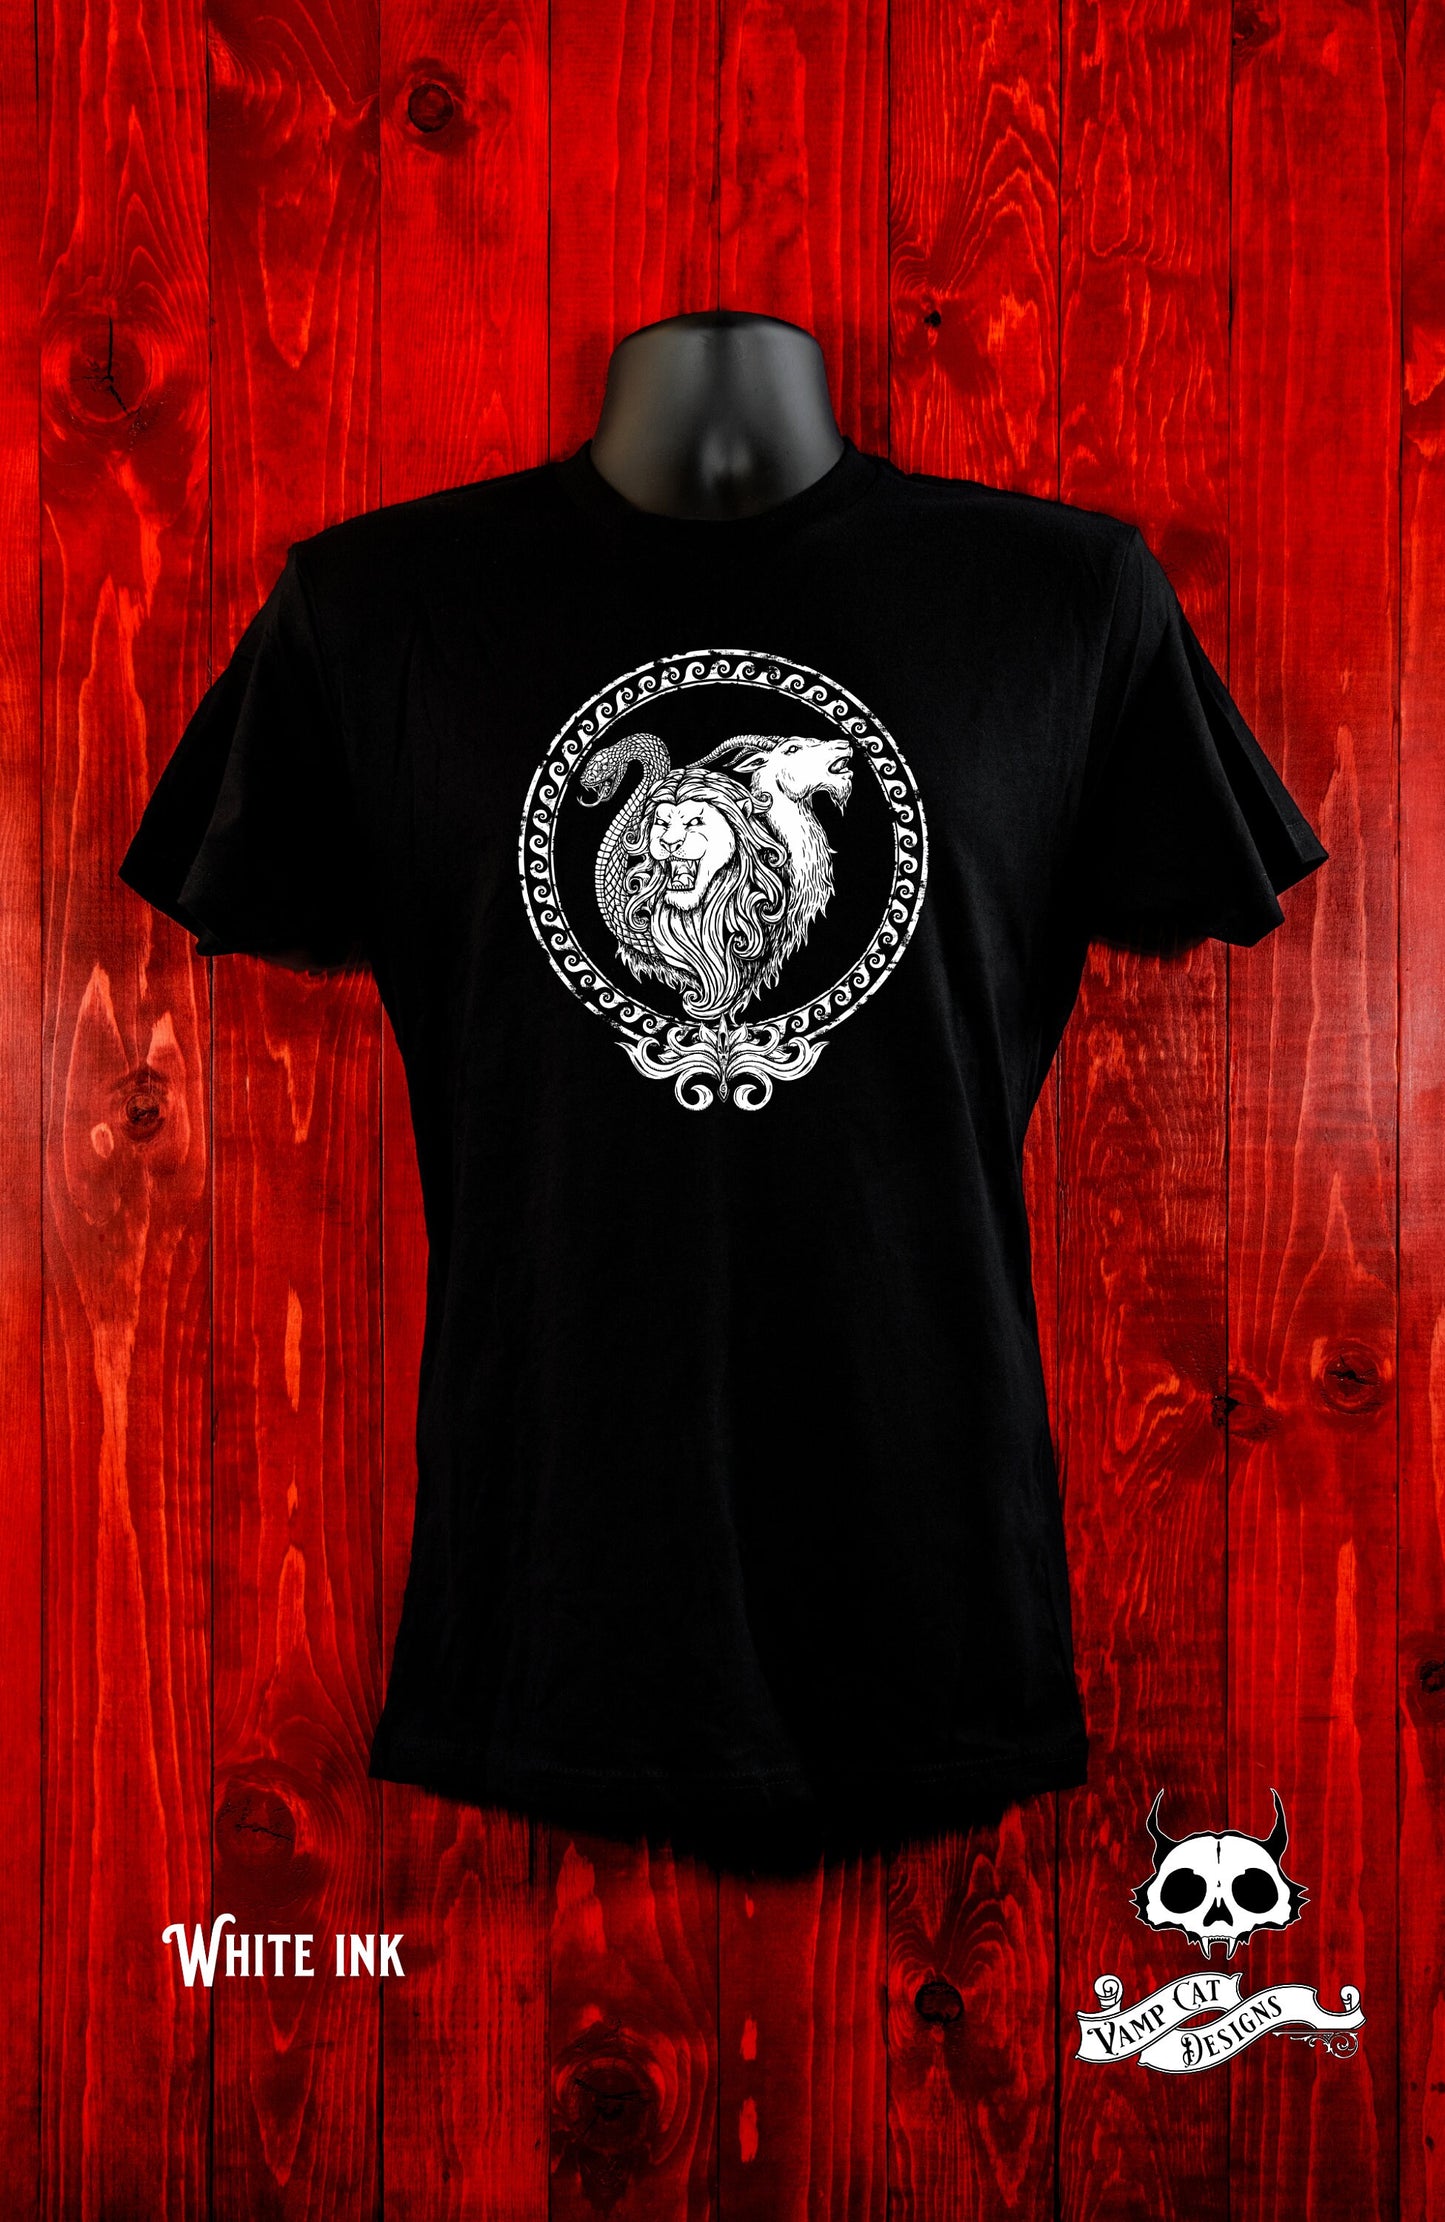 Chimera-Unisex Jersey Tee-Mythical Creature-Greek-Monster Tee-Men And Women Apparel-Greek Mythology Art-Lions And Snakes Art-Silk Screen Tee